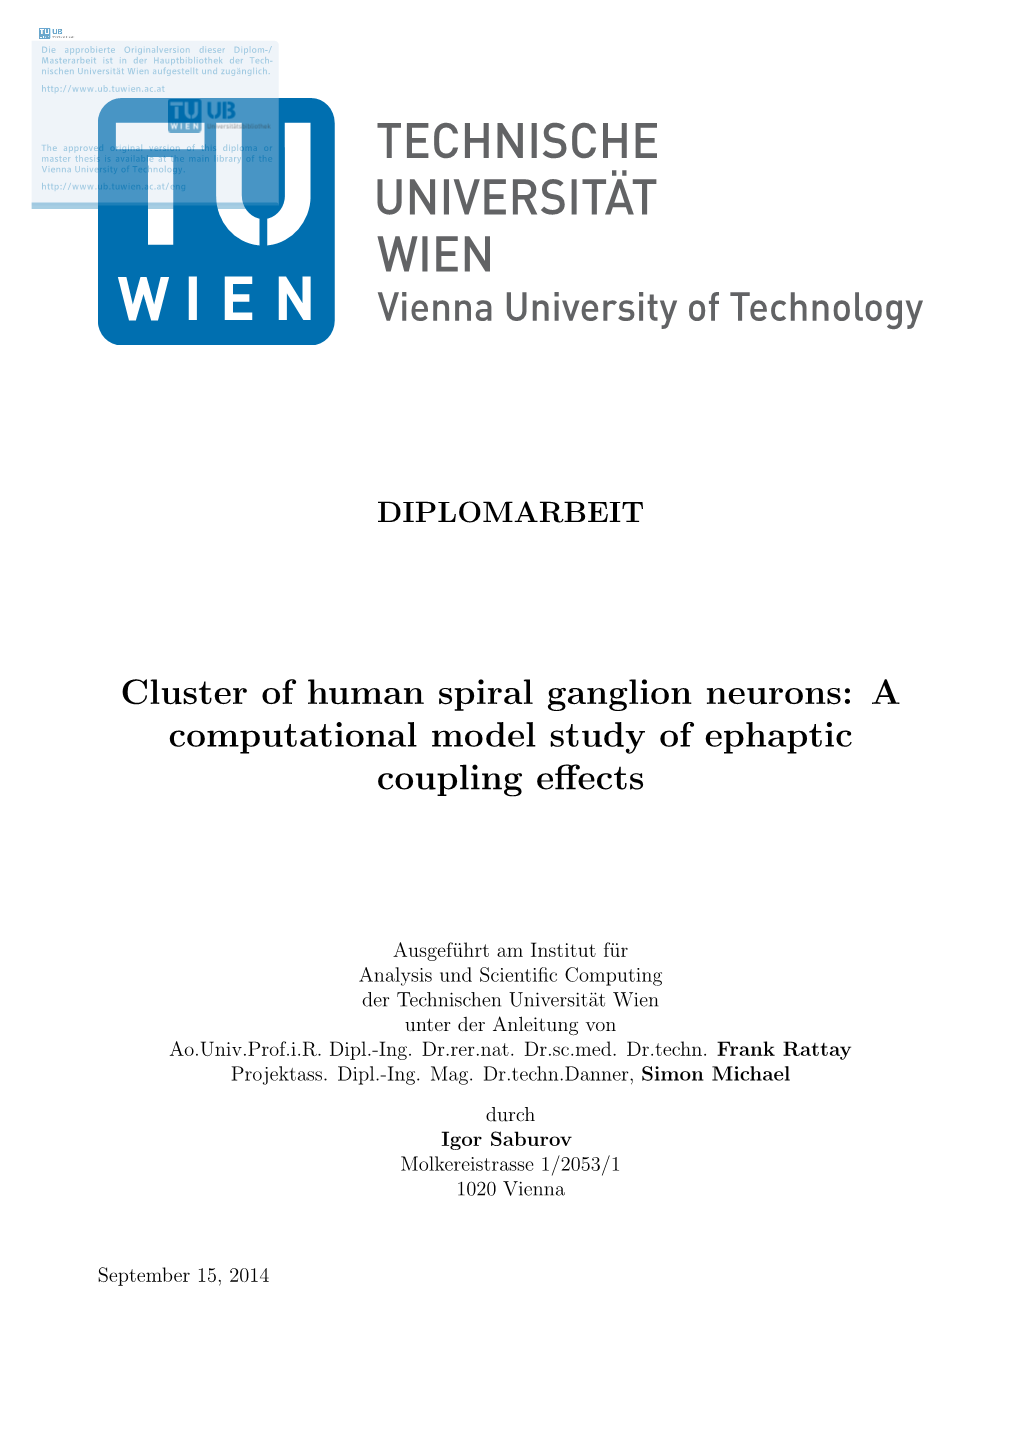 Cluster of Human Spiral Ganglion Neurons: a Computational Model Study of Ephaptic Coupling Eﬀects